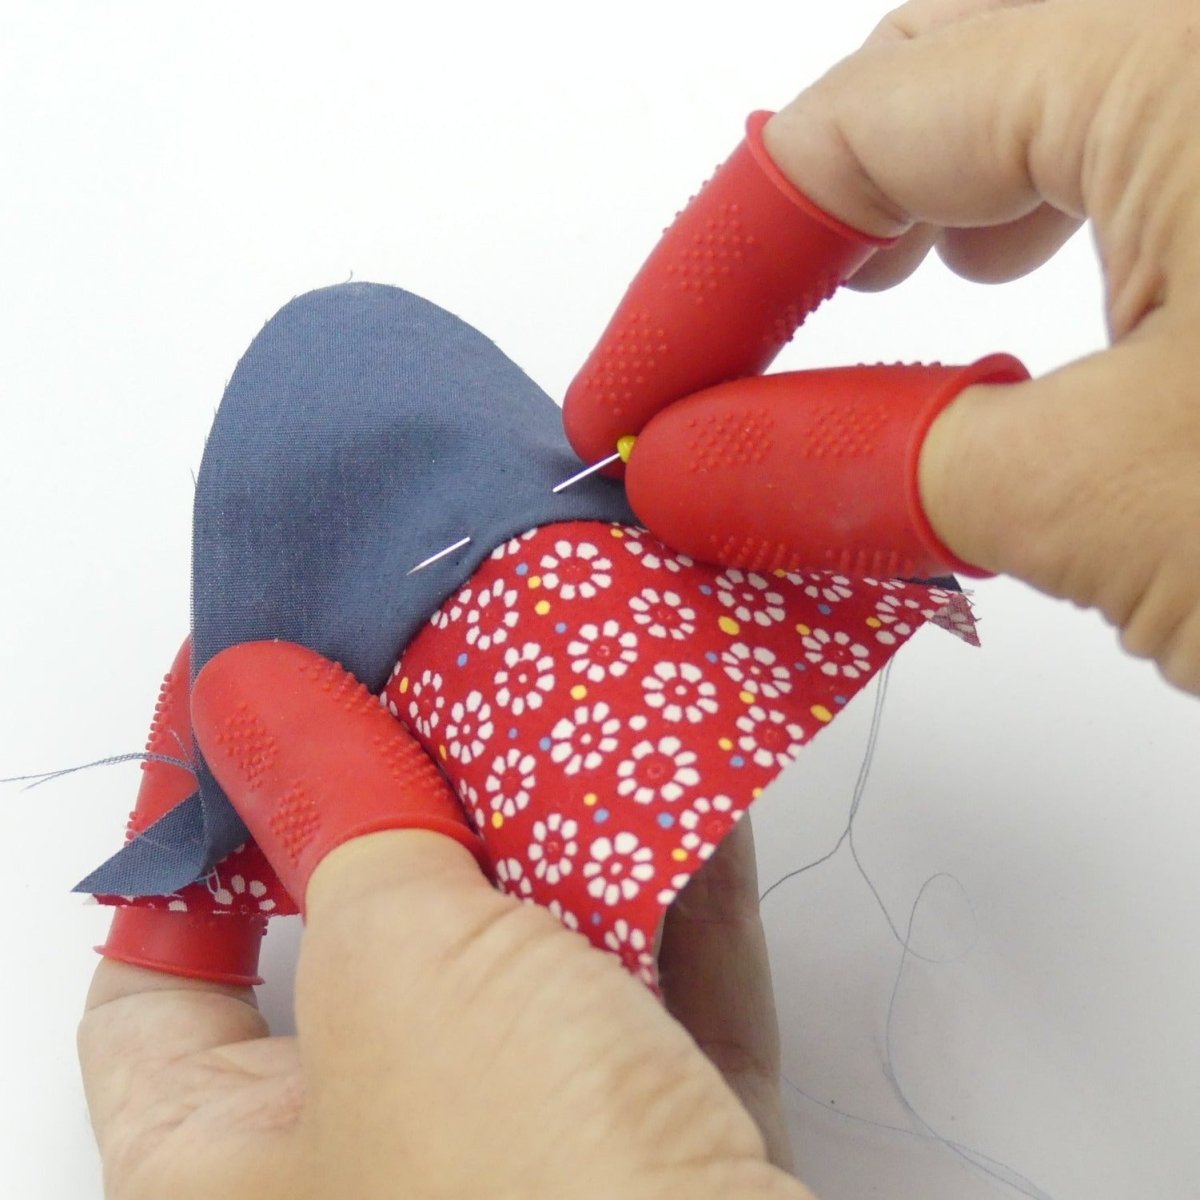 Picture shows how flexible the Ironing thimbles are...you don't even have to take them off to do a little hand sewing